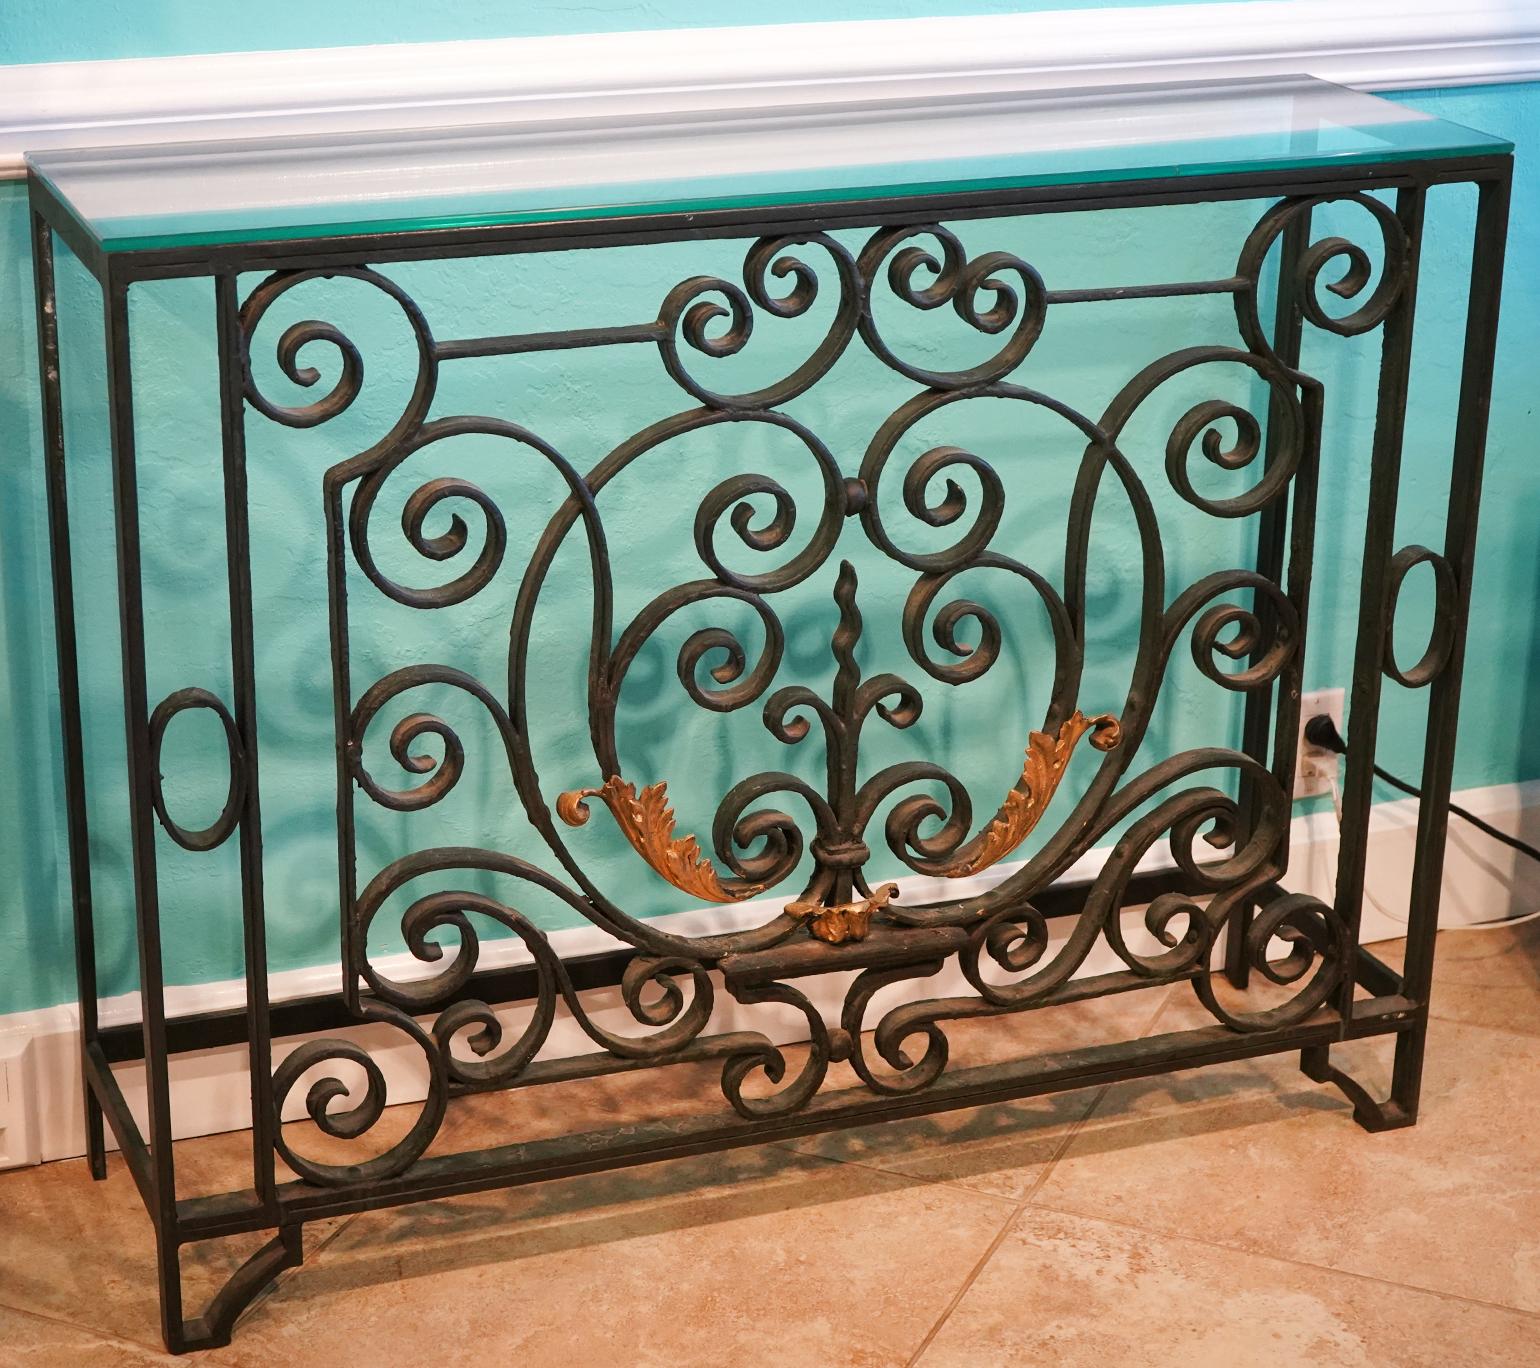 This elegant wrought console table in the French tradition features a front with unfolding scrolls centering a stylized fleur de lis adorned by gilt leaf work. The latter being of great decorative effect. The top is made of tempered glass and is